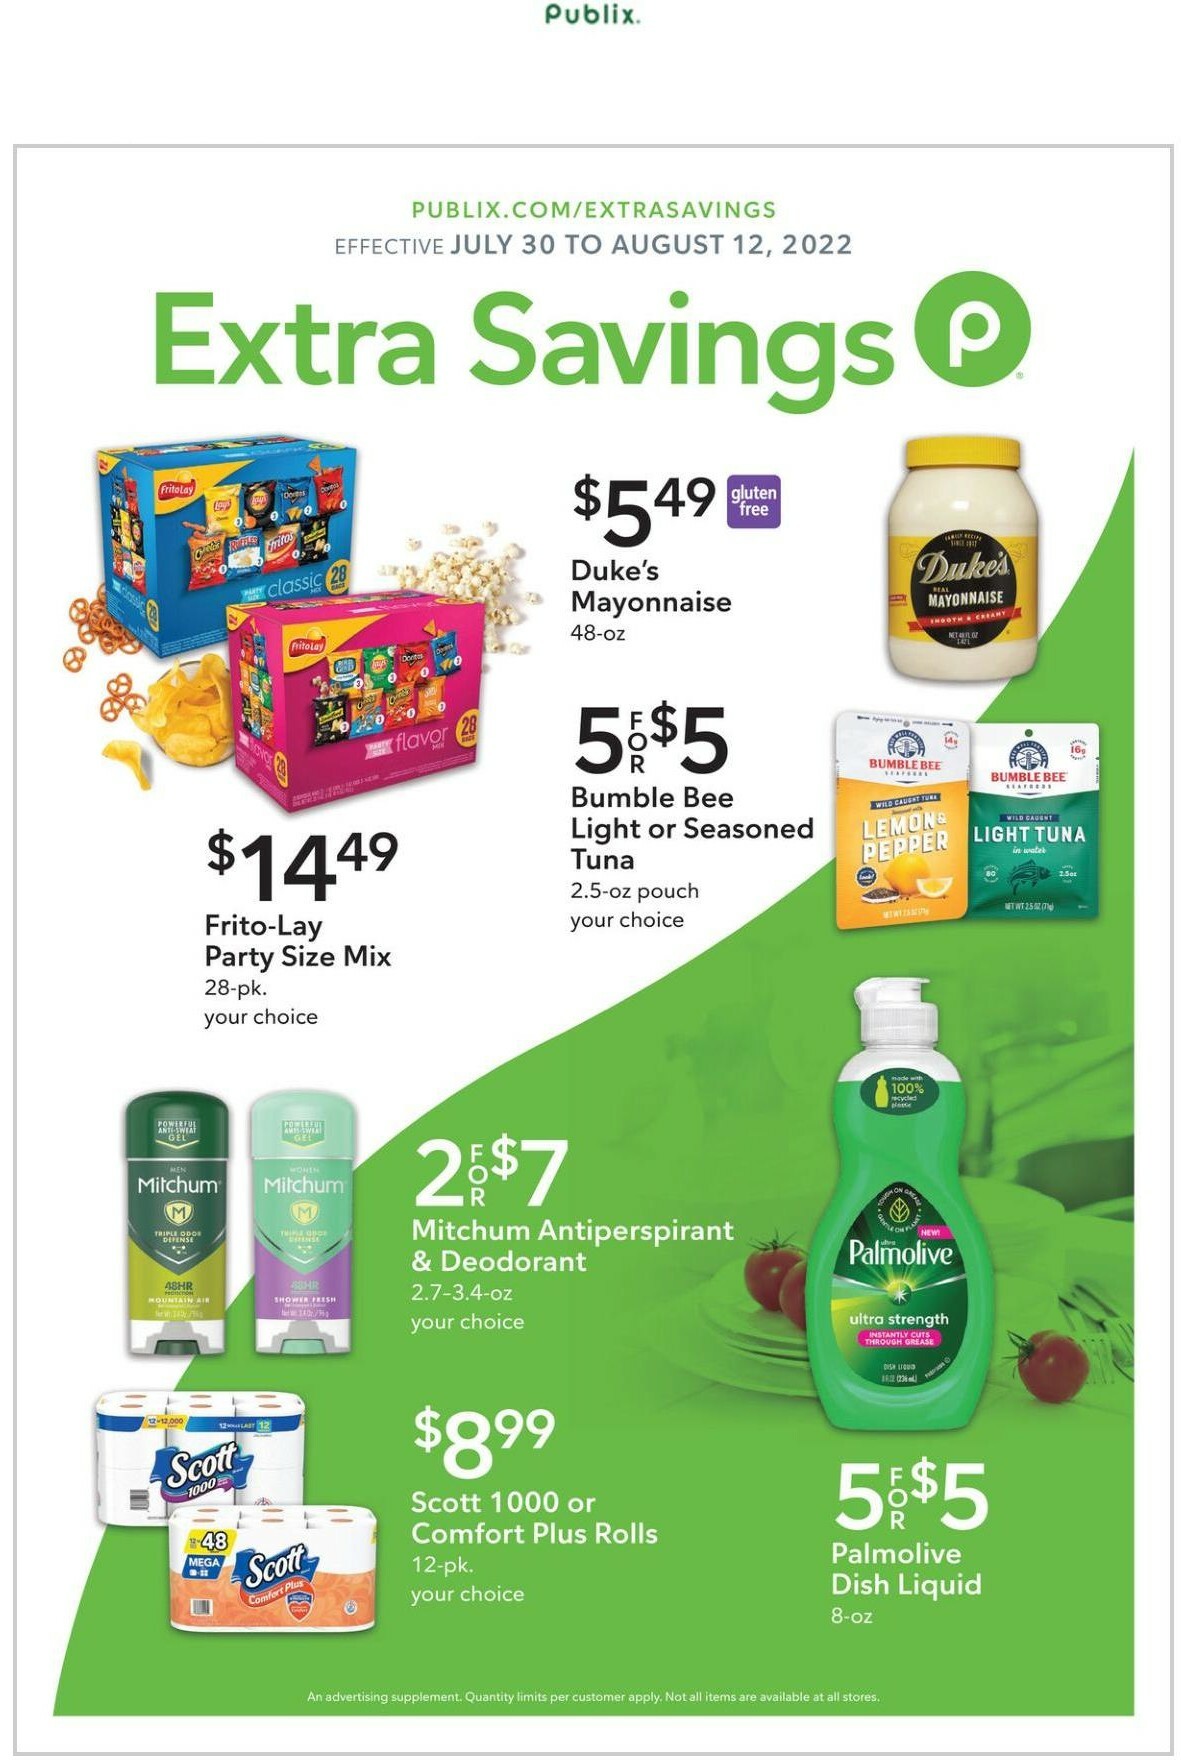 Publix Extra Savings from July 30